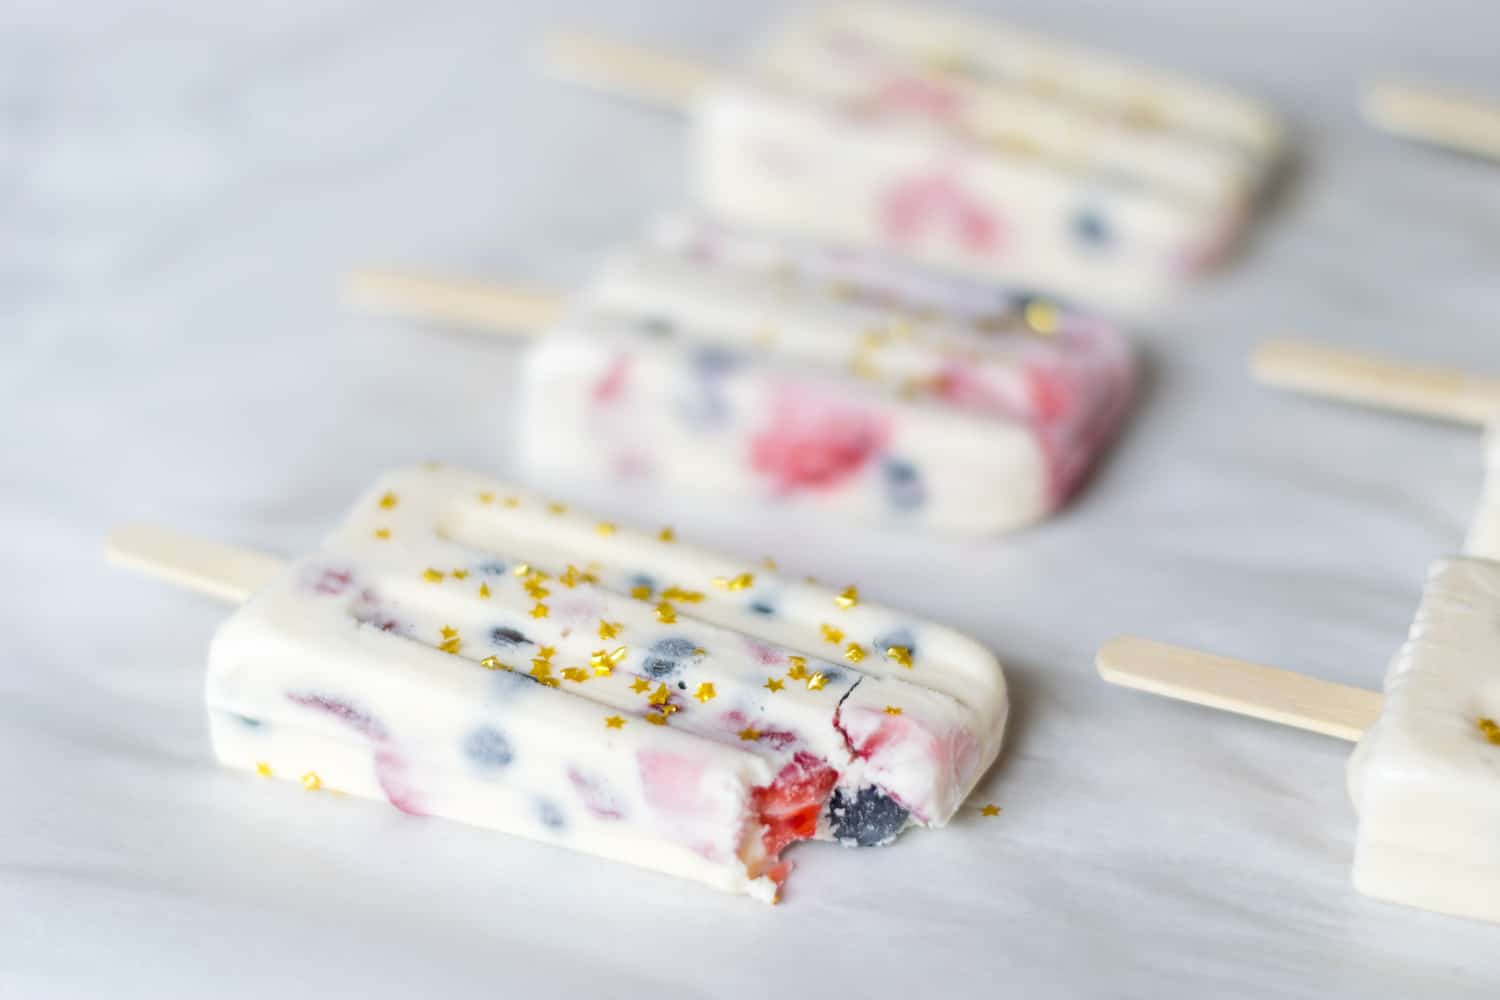 EASY to make red, white and blue ice cream popsicles are perfect for your Fourth of July festivities. Vanilla ice cream, chopped fresh strawberries and fresh blueberries make a perfect ice cream popsicle, made even more perfect with edible gold star sprinkles to up the 4th of July fun.